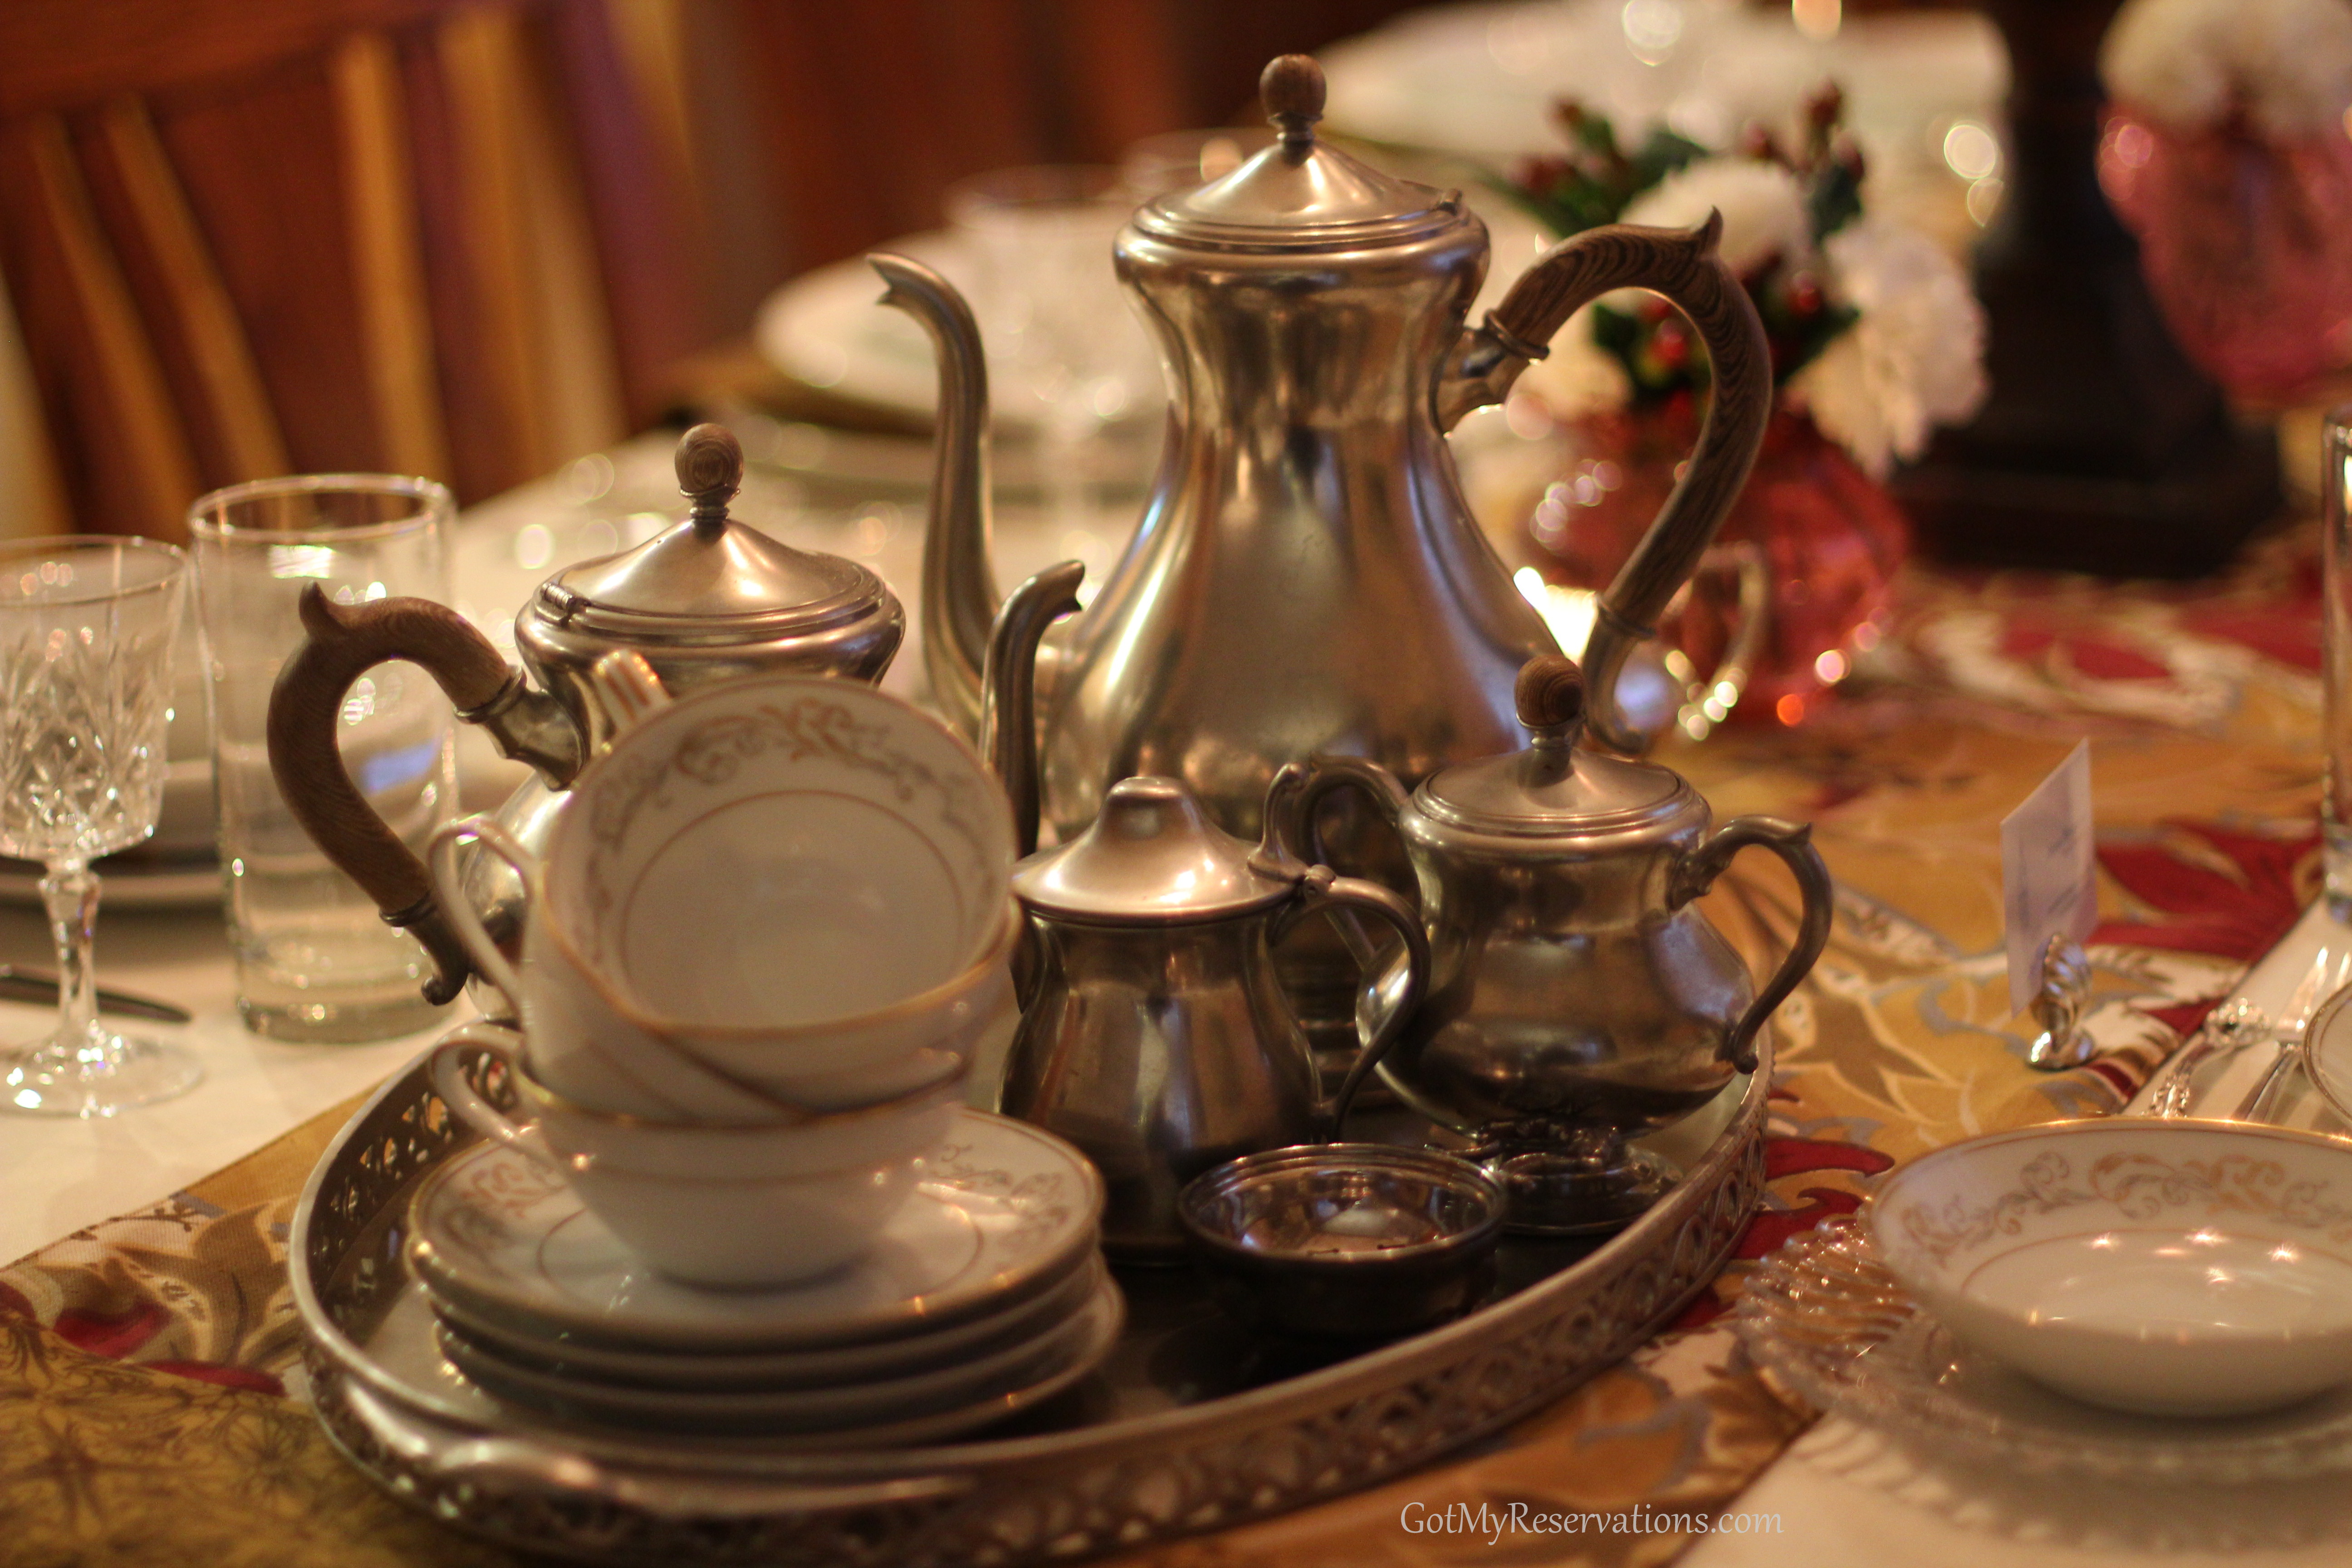 GotMyReservations Downton Abbey Tea and Coffee Service